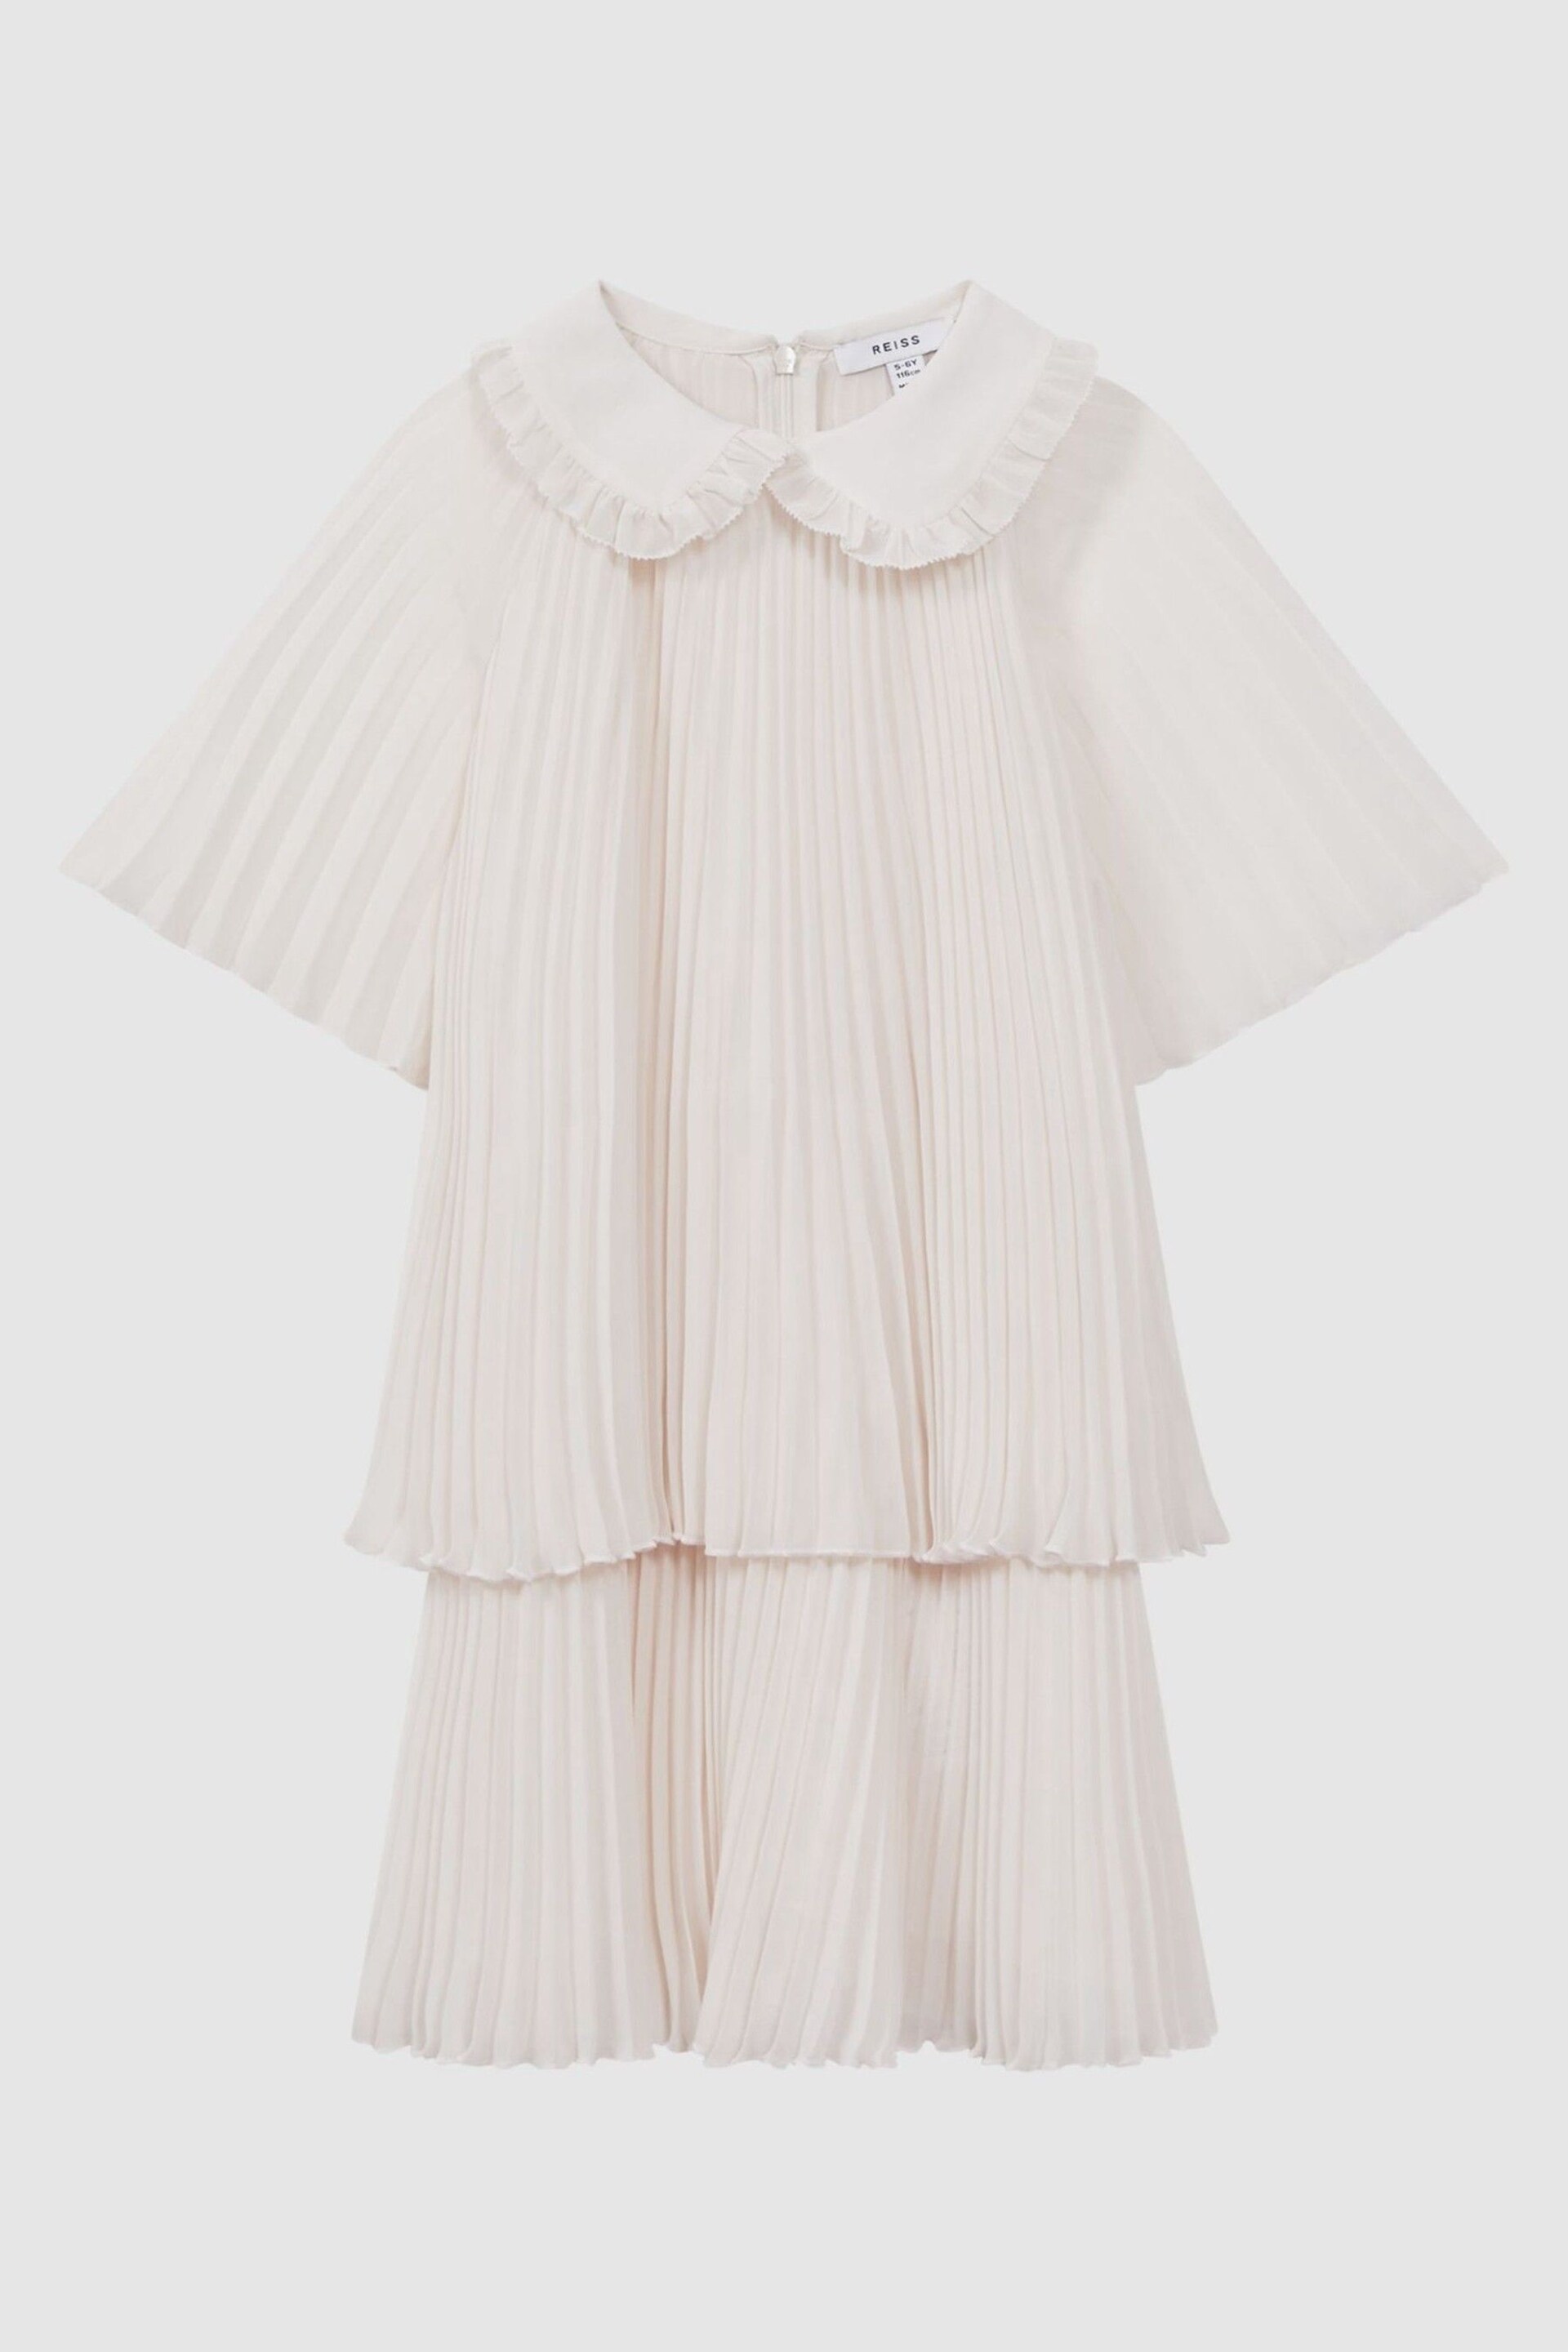 Reiss Ivory Nadia Senior Pleated Collared Tiered Dress - Image 2 of 7